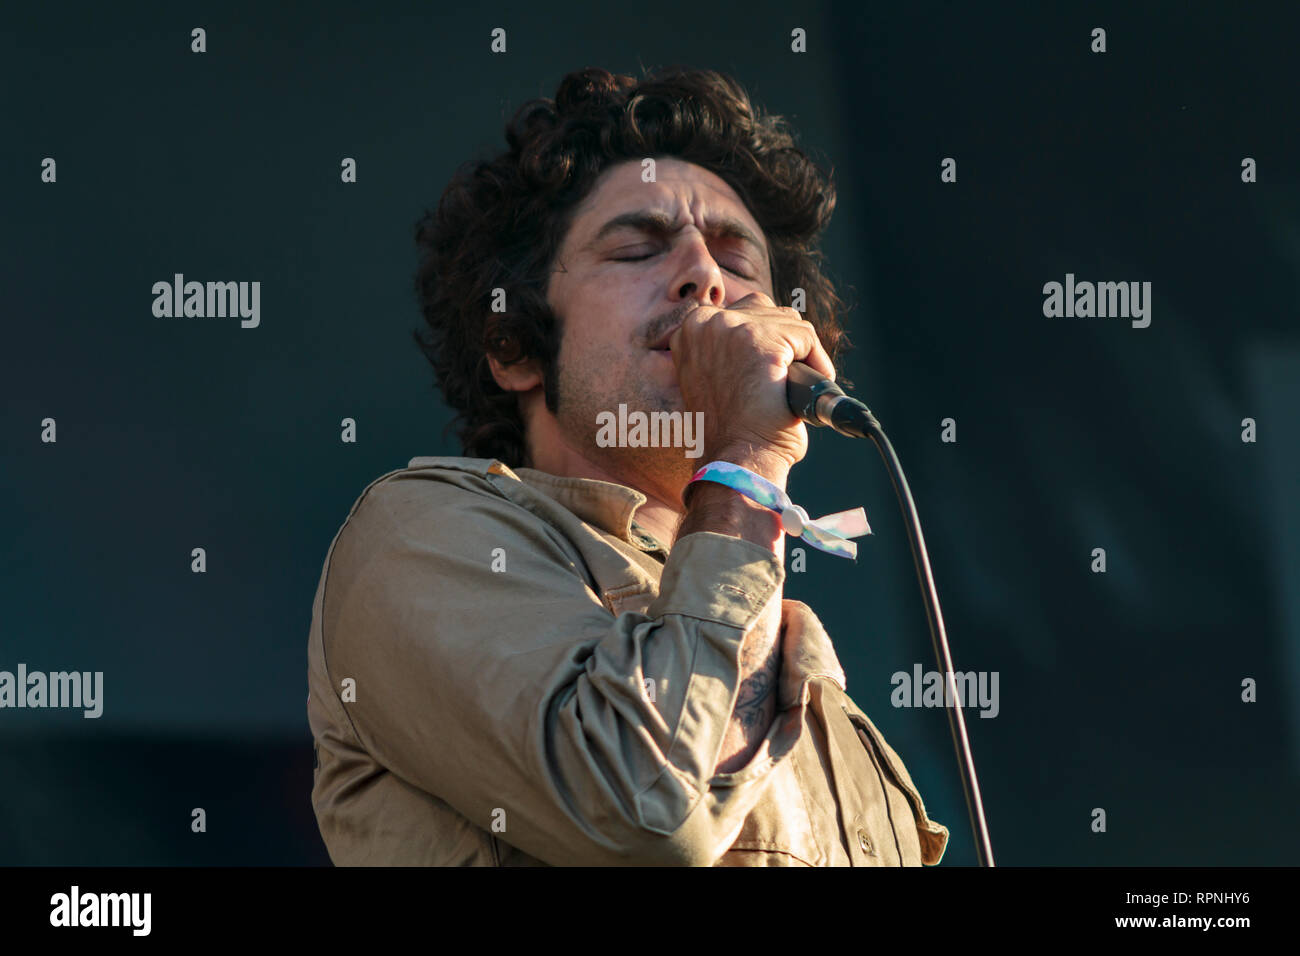 Musician Brooks Nielsen of the band The Growlers performs at